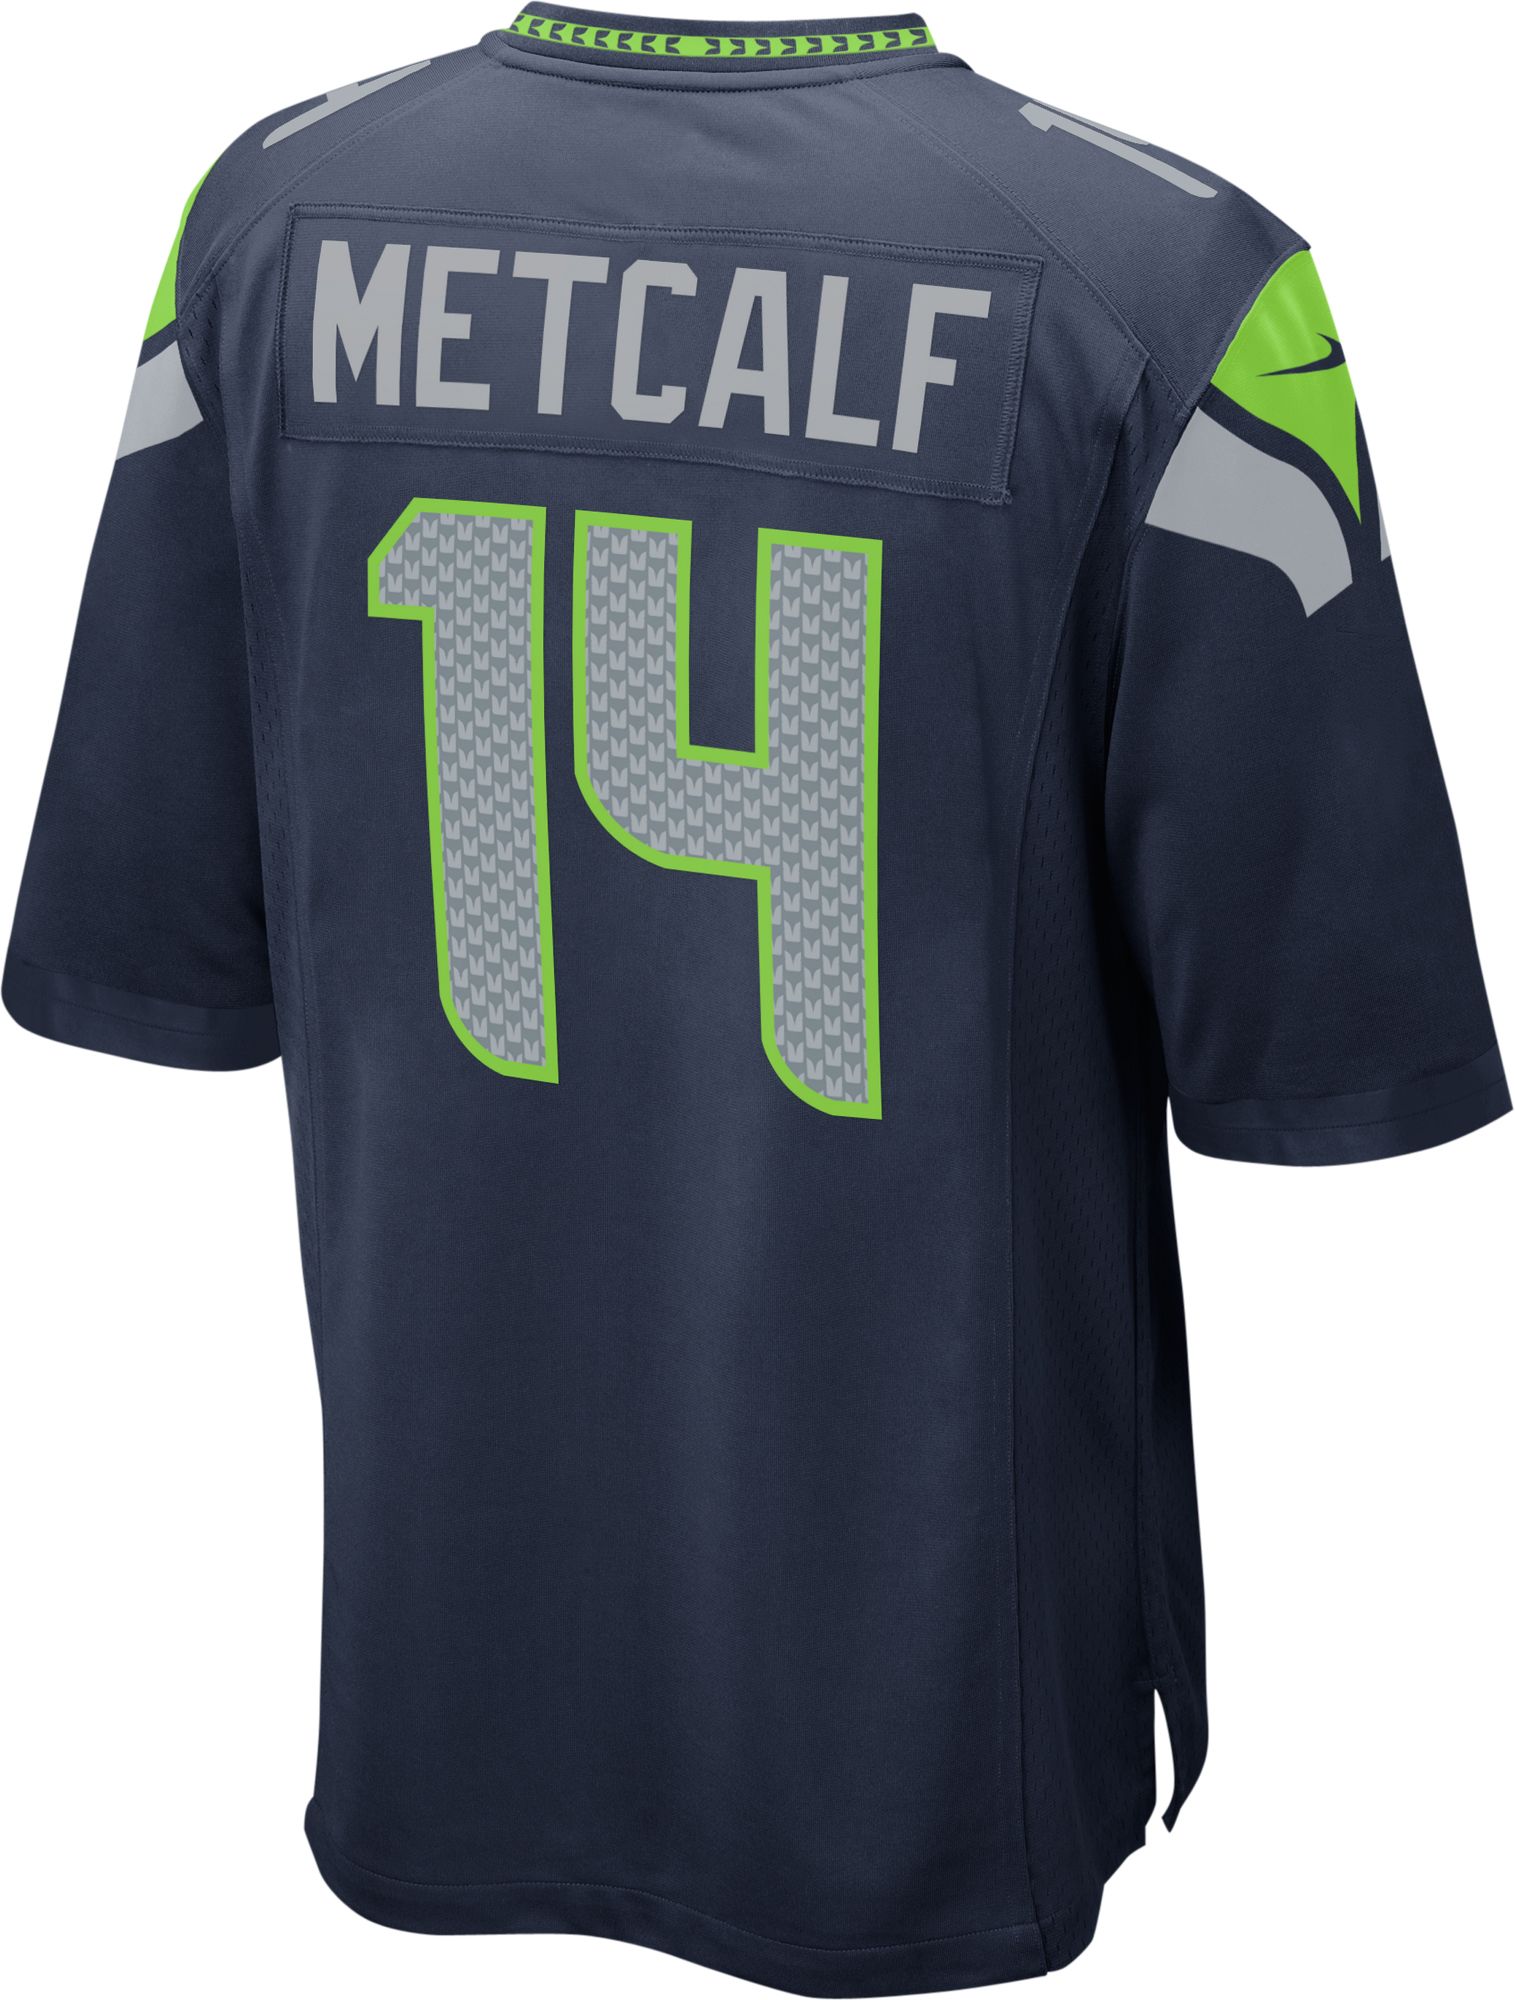 seahawks youth jersey